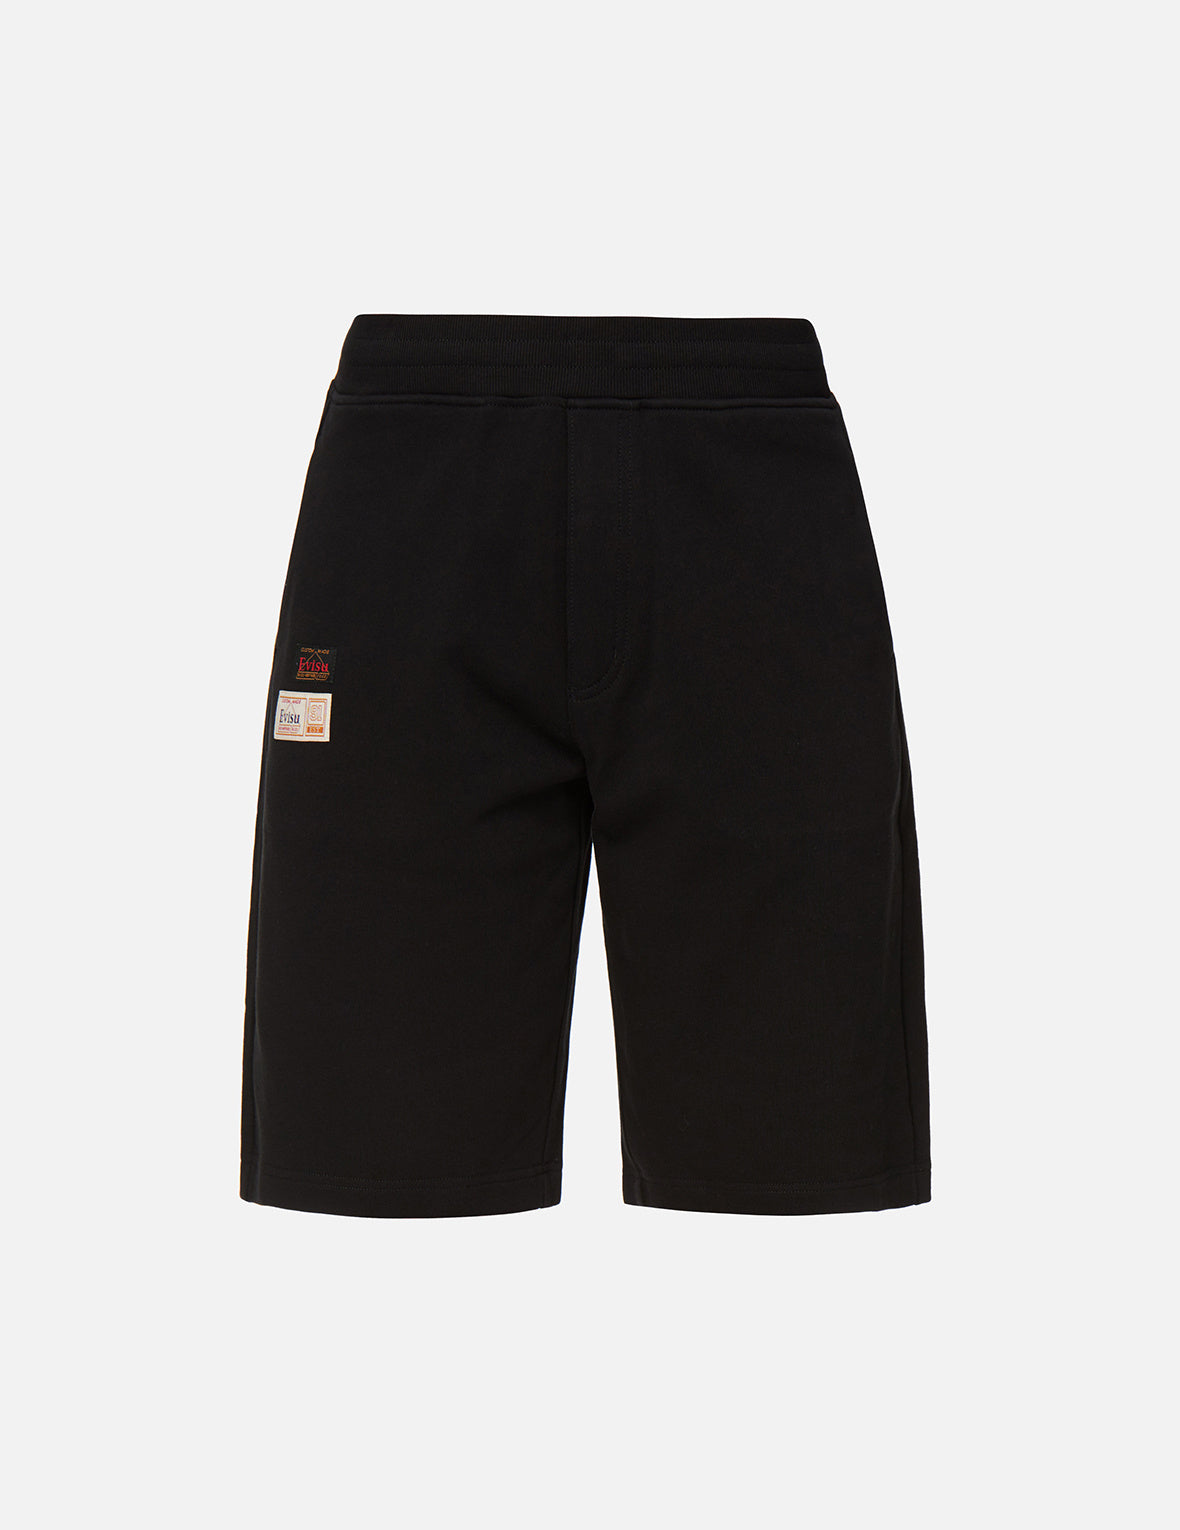 Evisu Streamlined Daicock and Kamon Sweat Shorts ( New Collection ) - Shop Streetwear, Sneakers, Slippers and Gifts online | Malaysia - The Factory KL